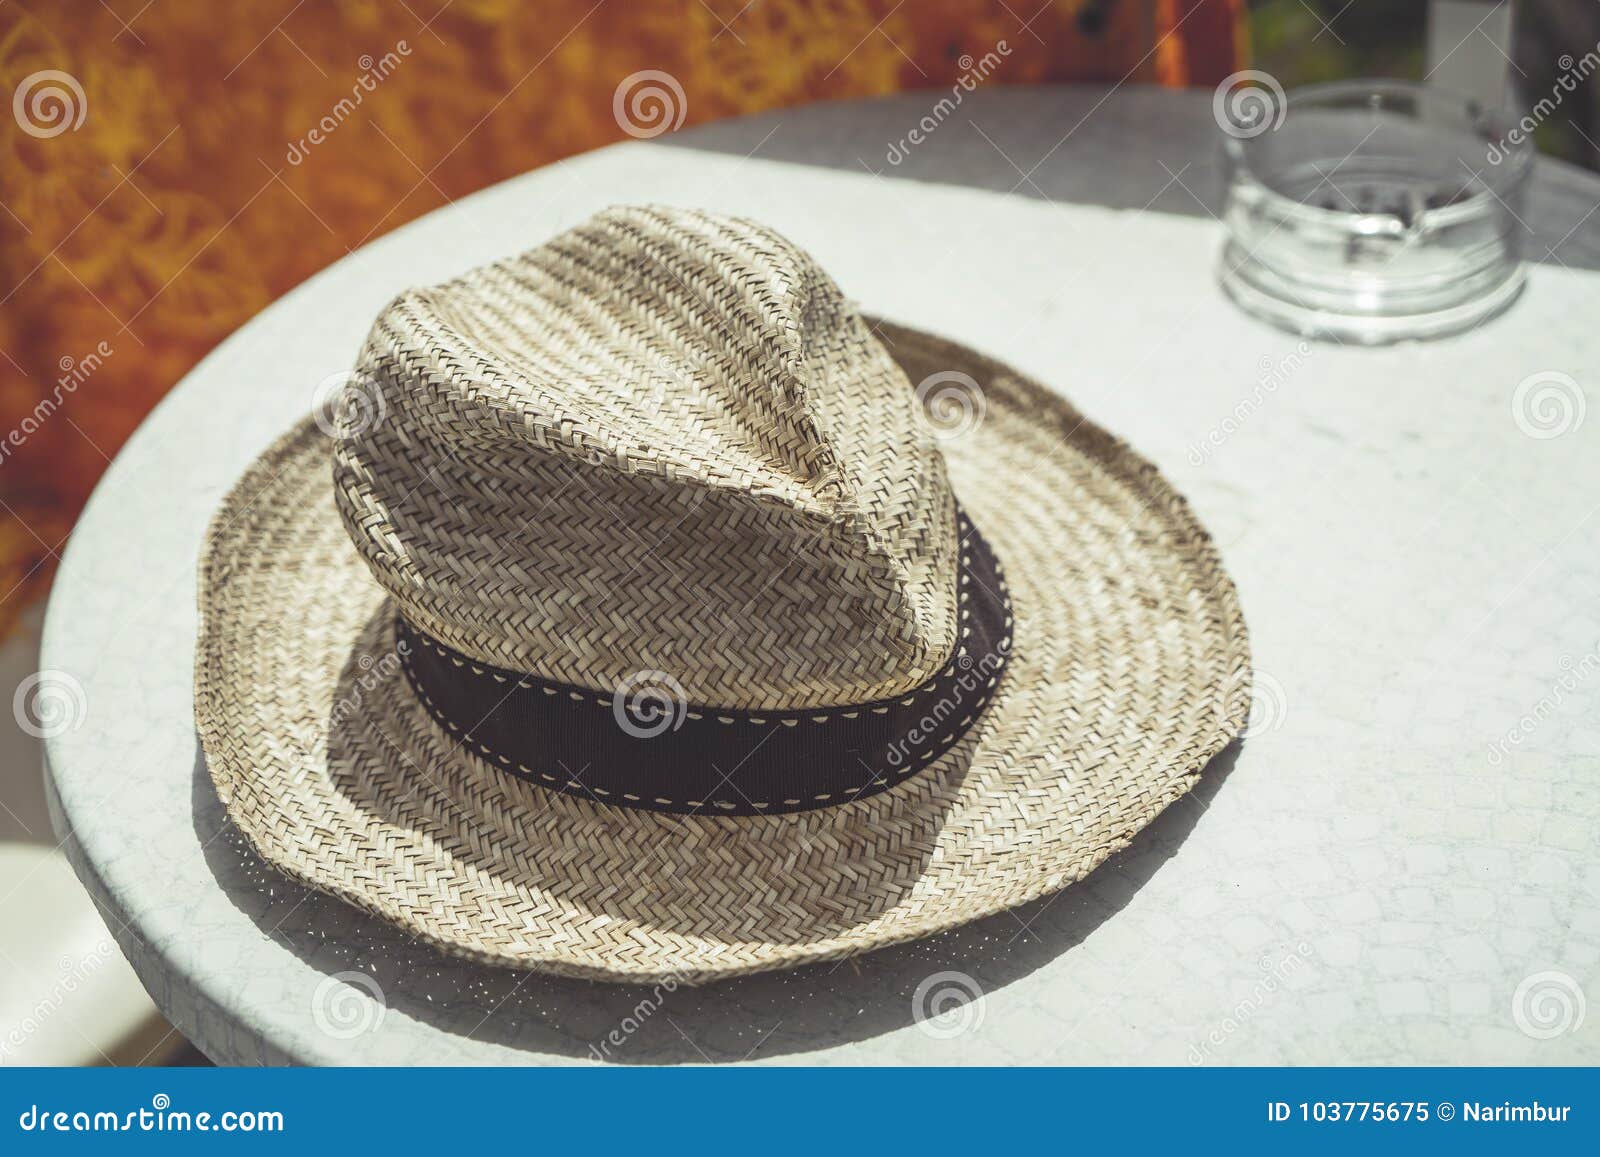 Old straw hat on a table stock image. Image of clothing - 103775675